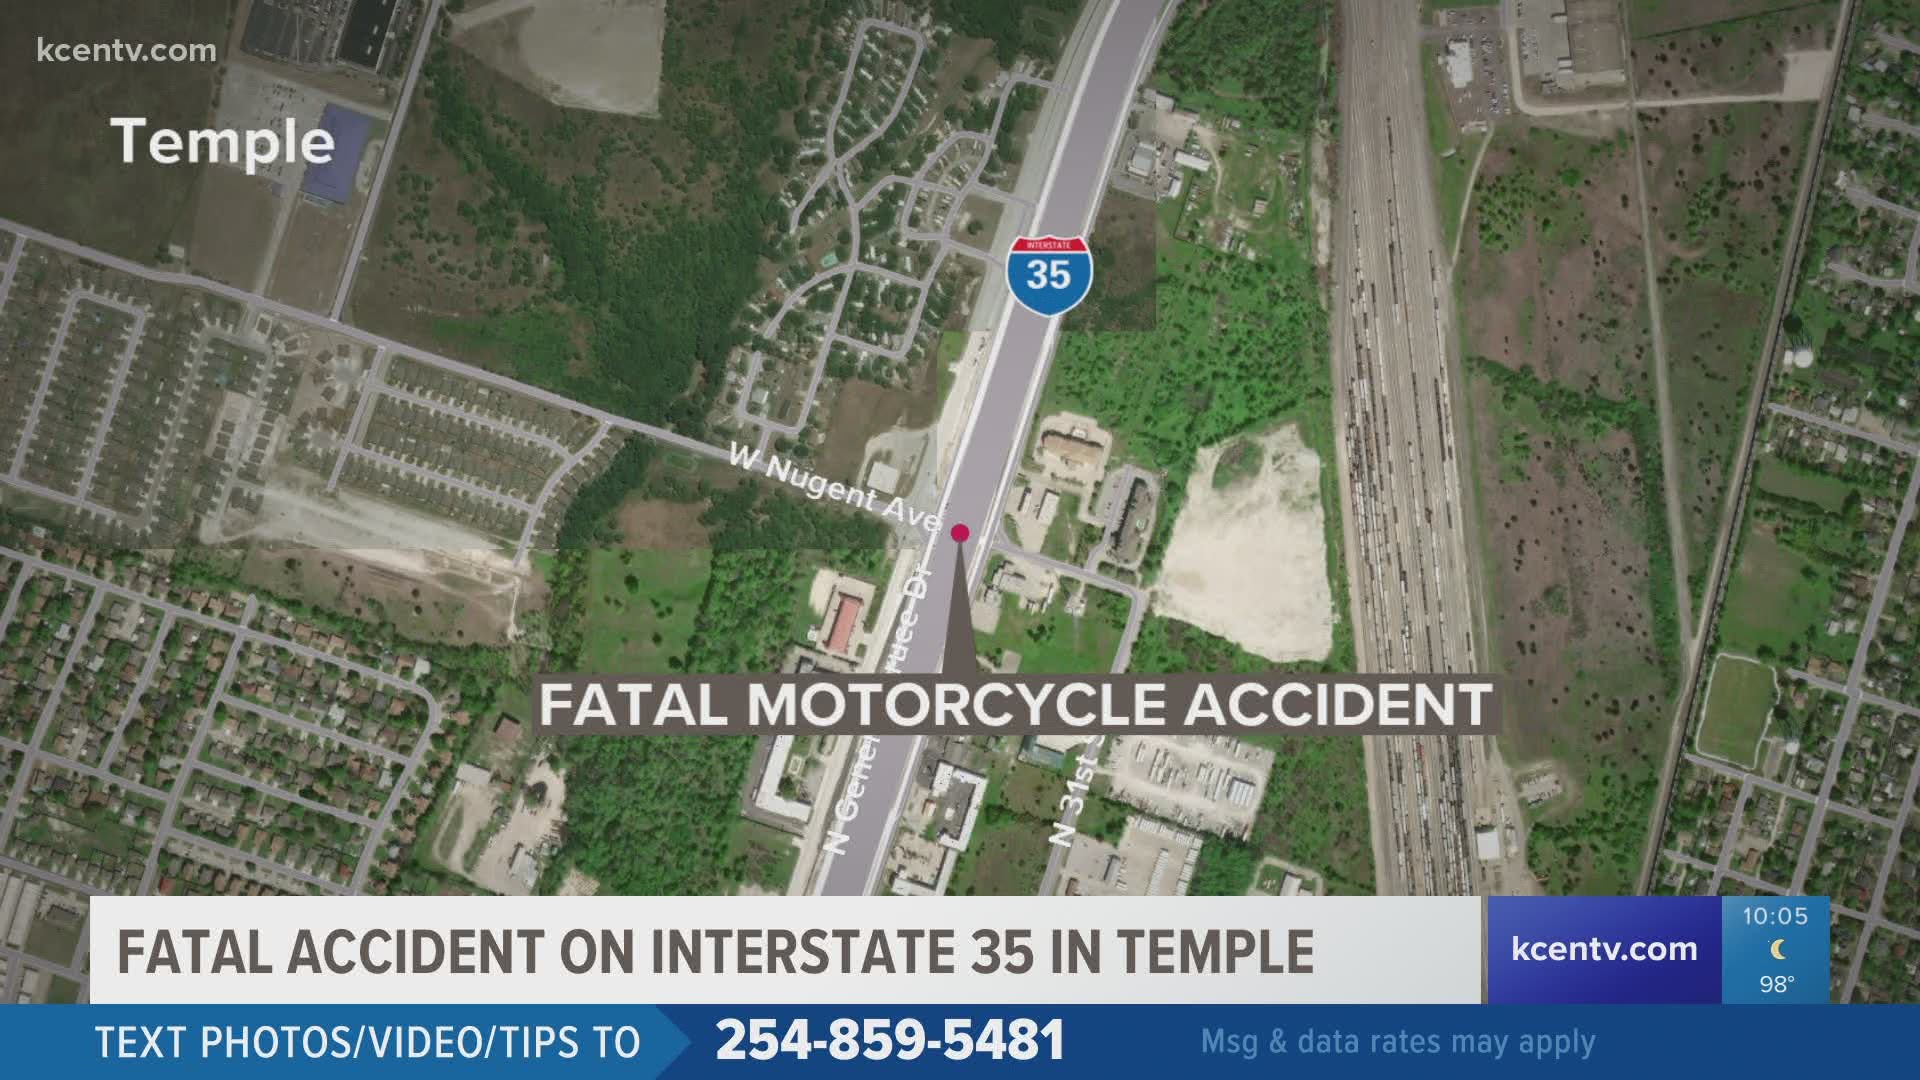 The accident happened early Saturday morning on I-35 near West Nugent Avenue. The victim has not yet been identified.